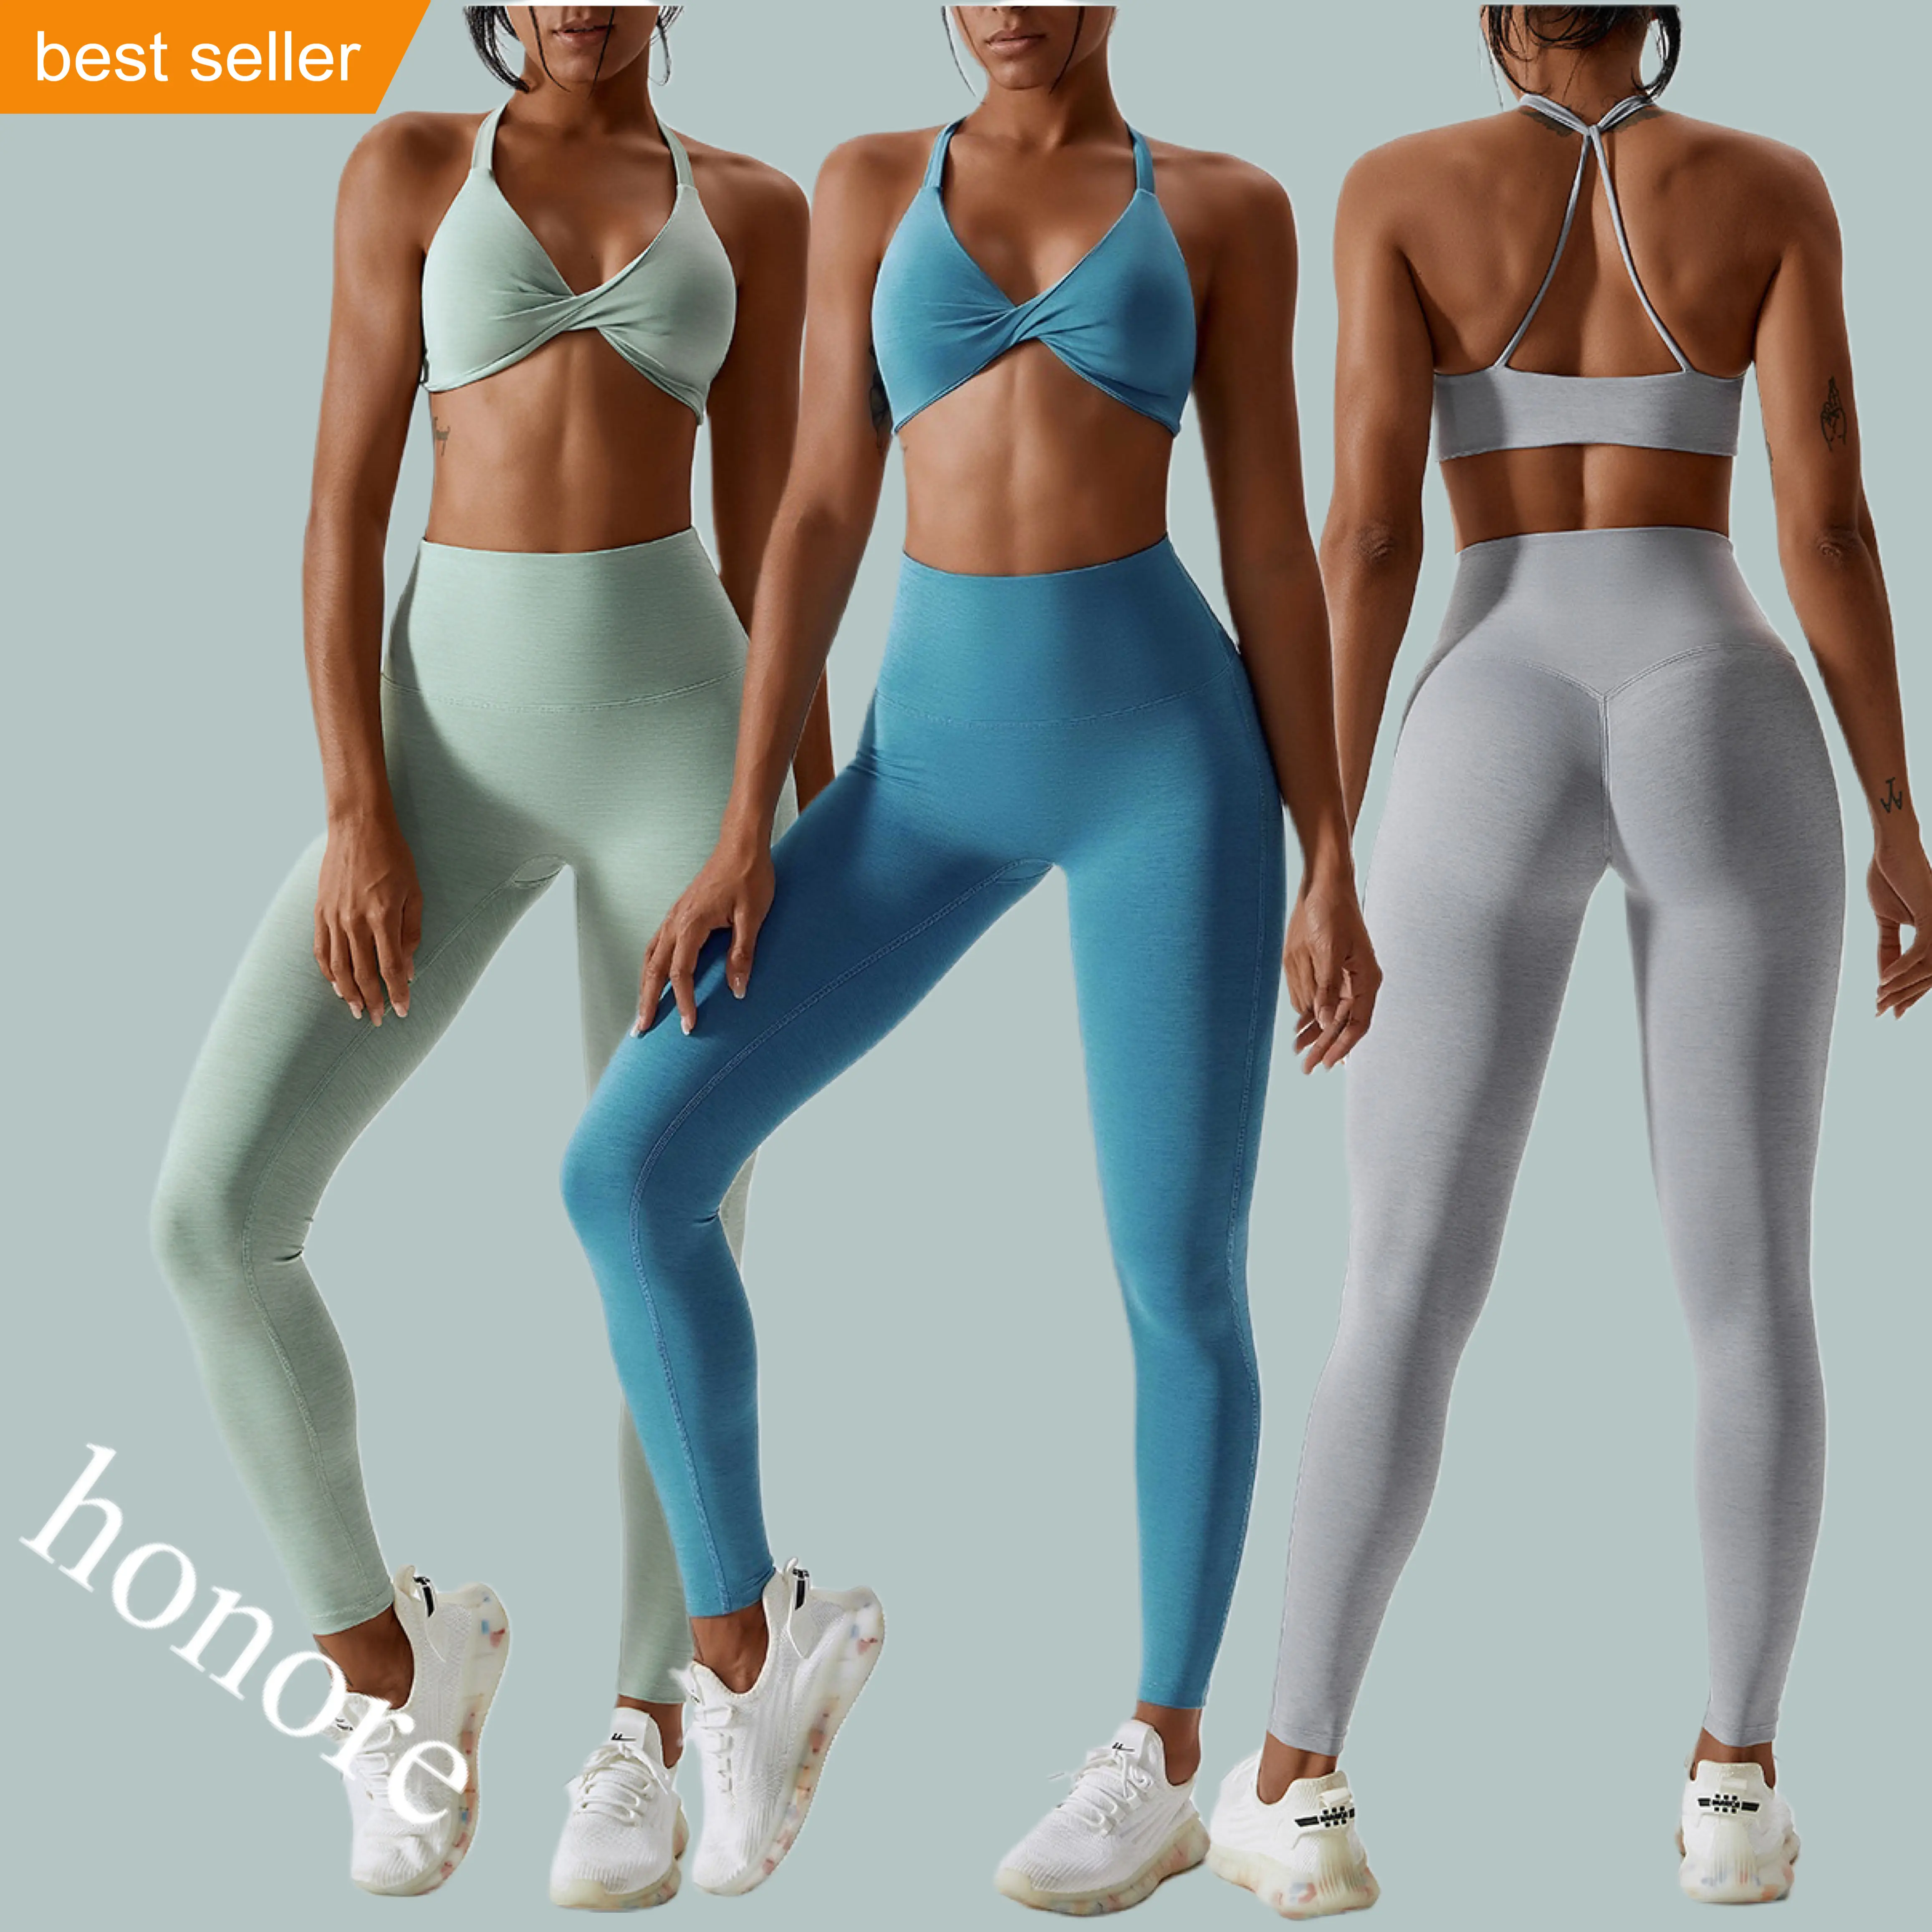 High Quality Women Leggings Workout Clothes Suit Activewear Sports Plus Size Seamless Gym Bra Fitness Yoga Sets